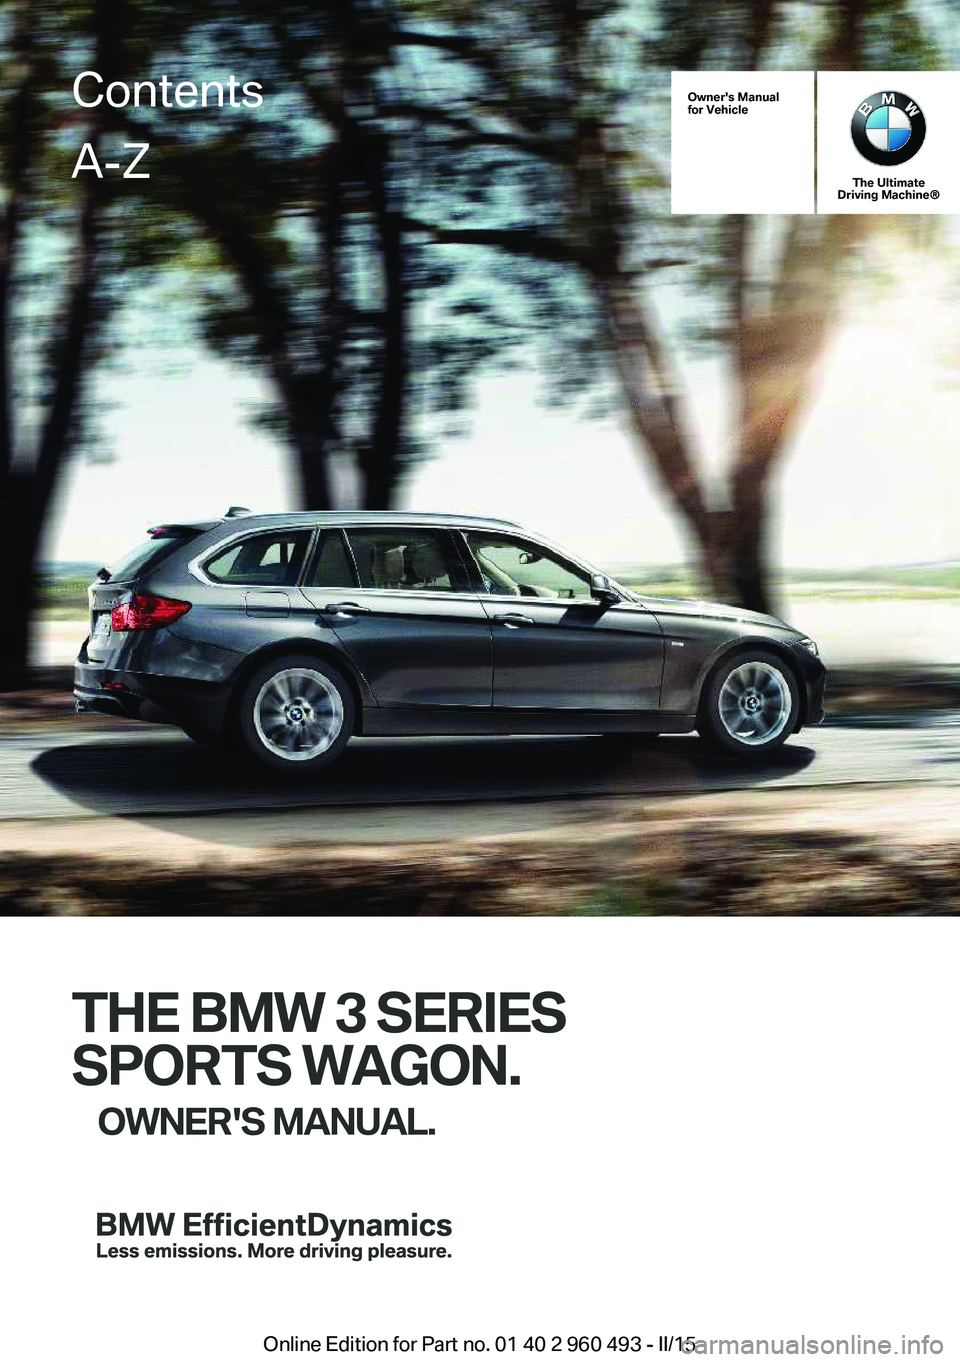 BMW 328I XDRIVE SPORTS WAGON 2015  Owners Manual Owner's Manual
for Vehicle
The Ultimate
Driving Machine®
THE BMW 3 SERIES
SPORTS WAGON. OWNER'S MANUAL.
ContentsA-Z
Online Edition for Part no. 01 40 2 960 493 - II/15   